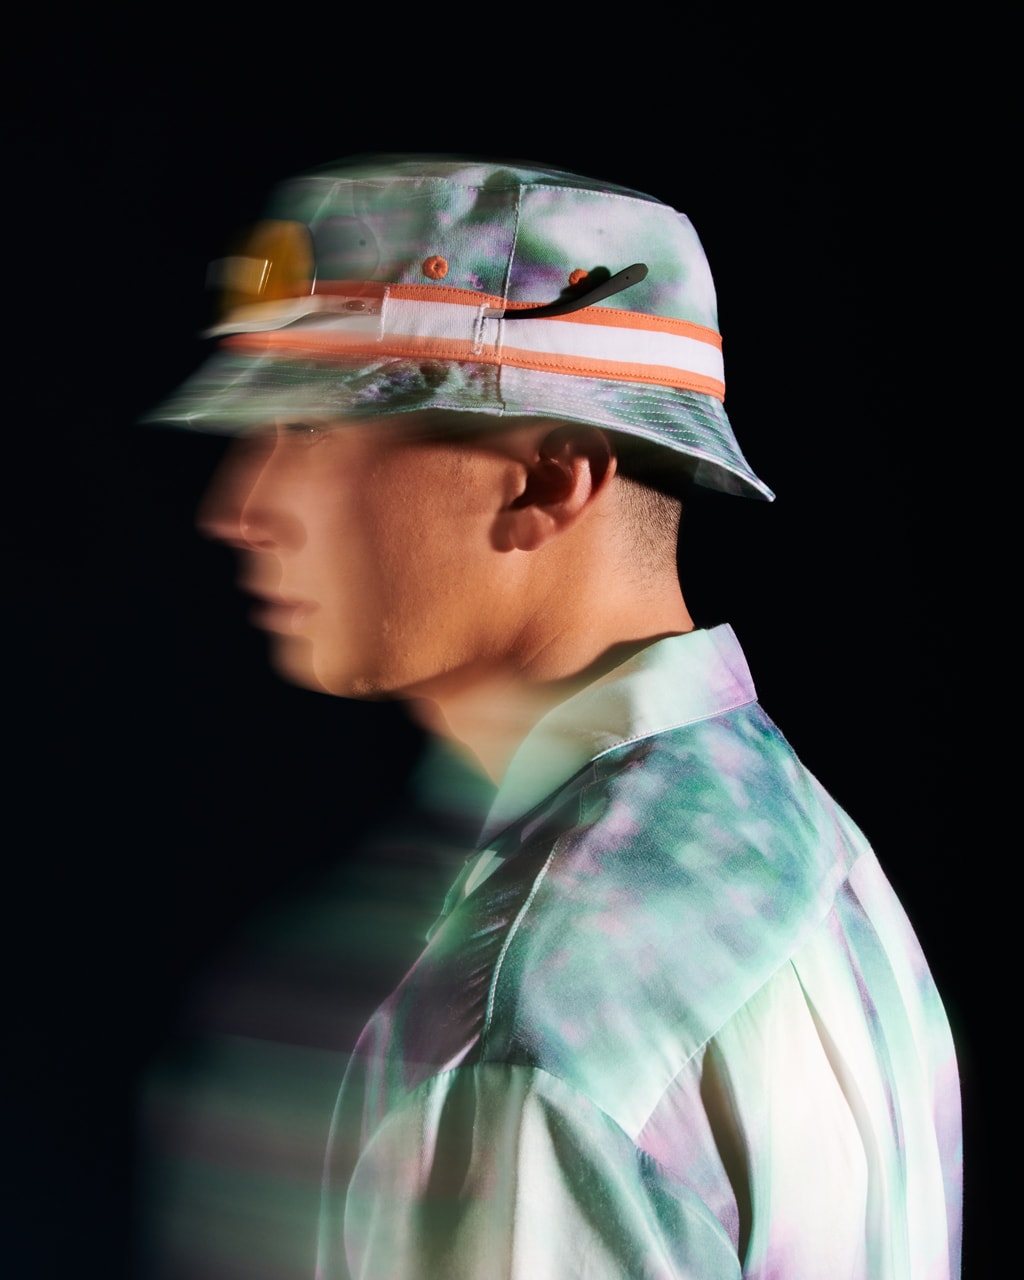 Metalwood and Garrett Leight California Optical Present an Ode to Golf With New Collaboration